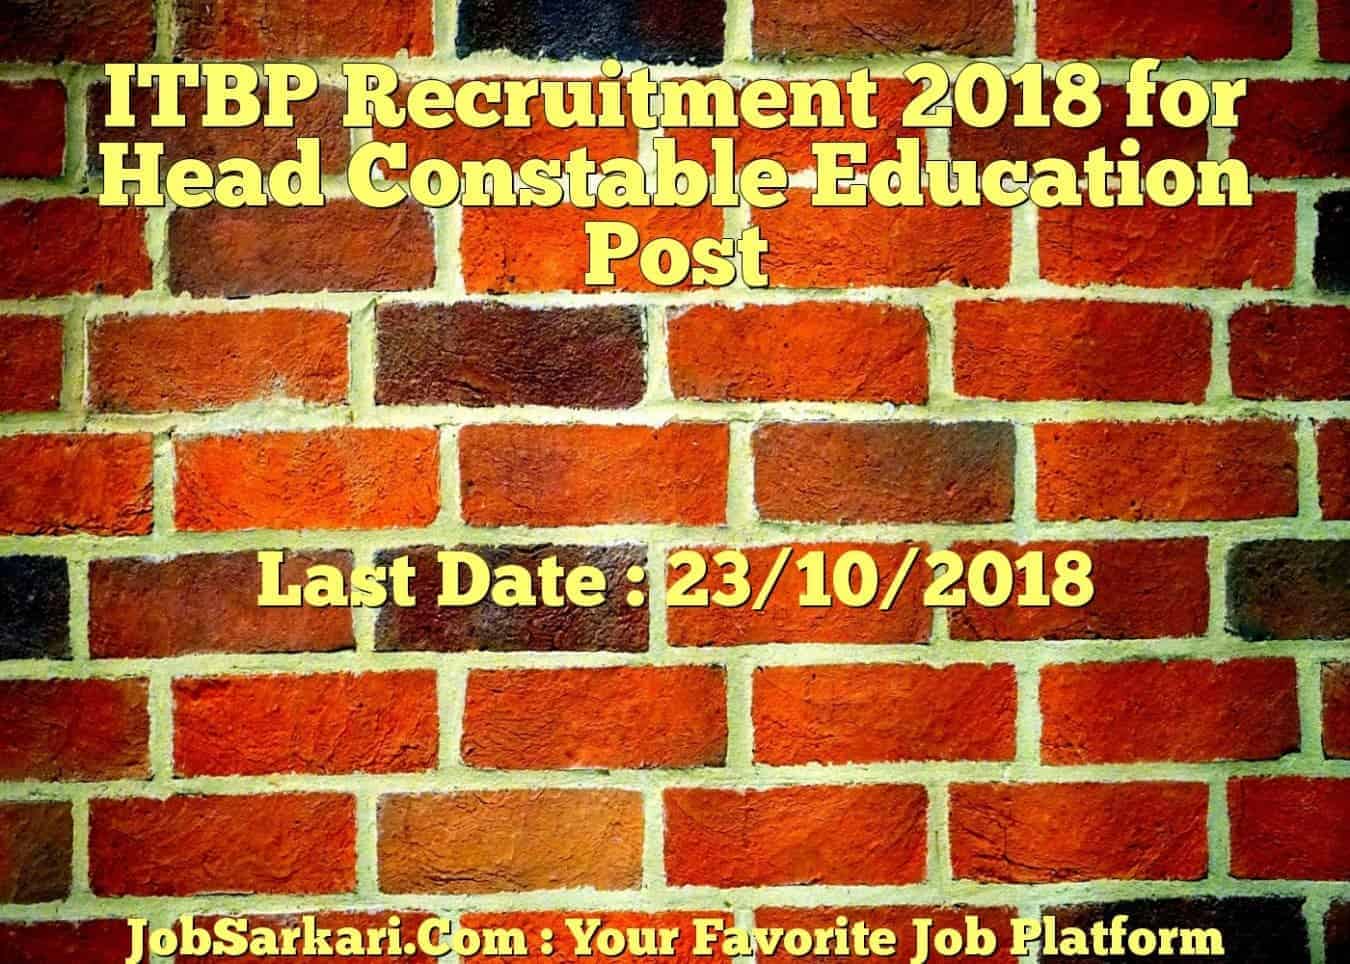 ITBP Recruitment 2018 for Head Constable Education Post